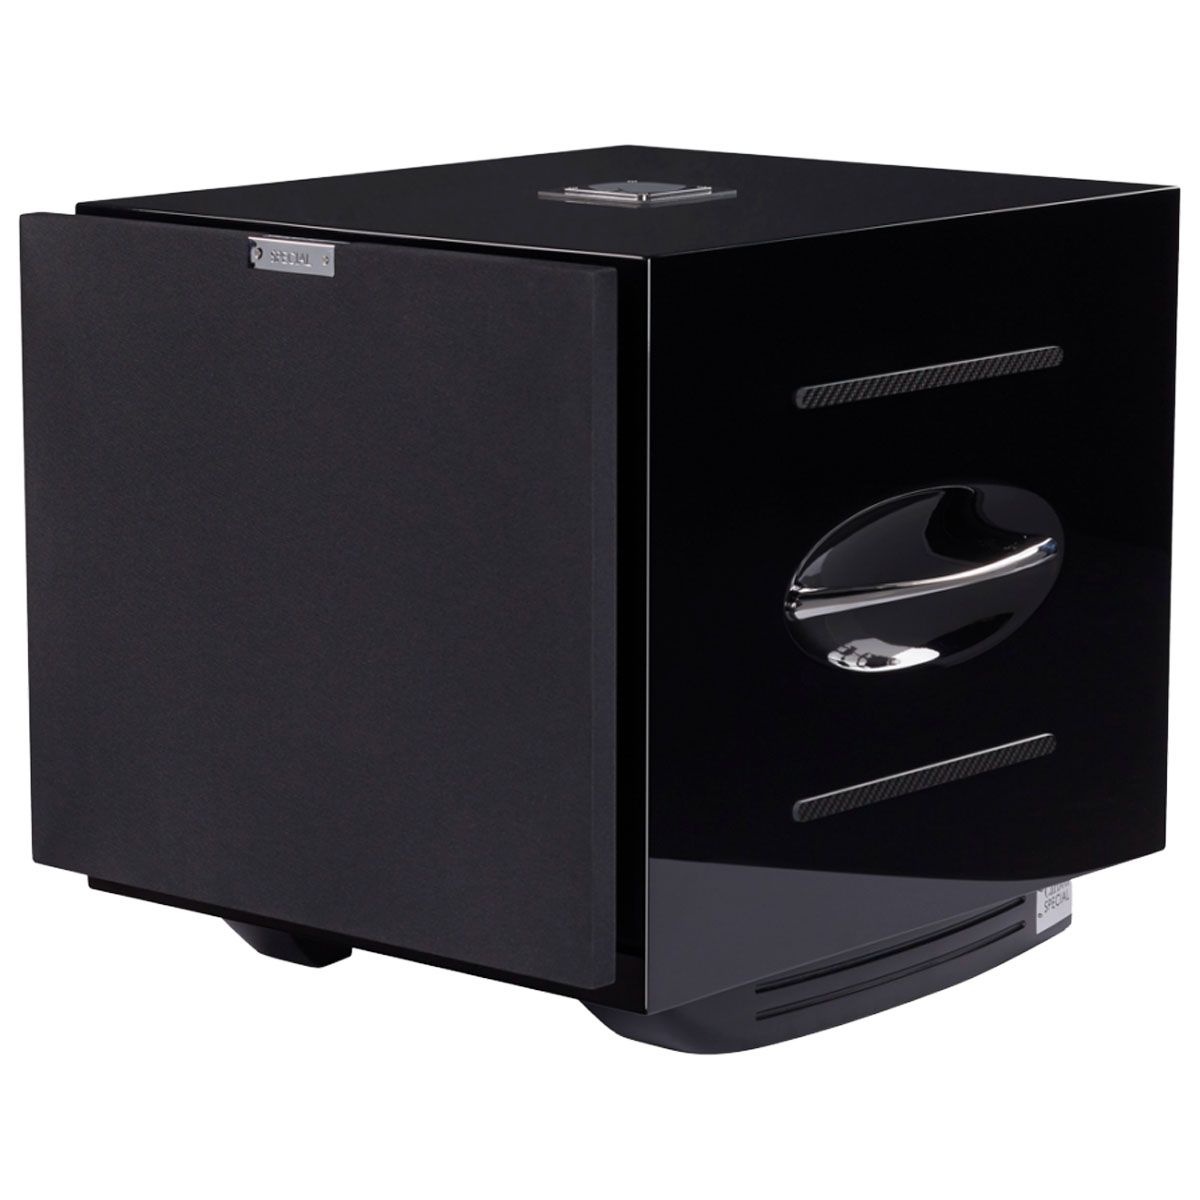 REL Serie S Carbon Special Subwoofer - Piano Black angled front view with grille